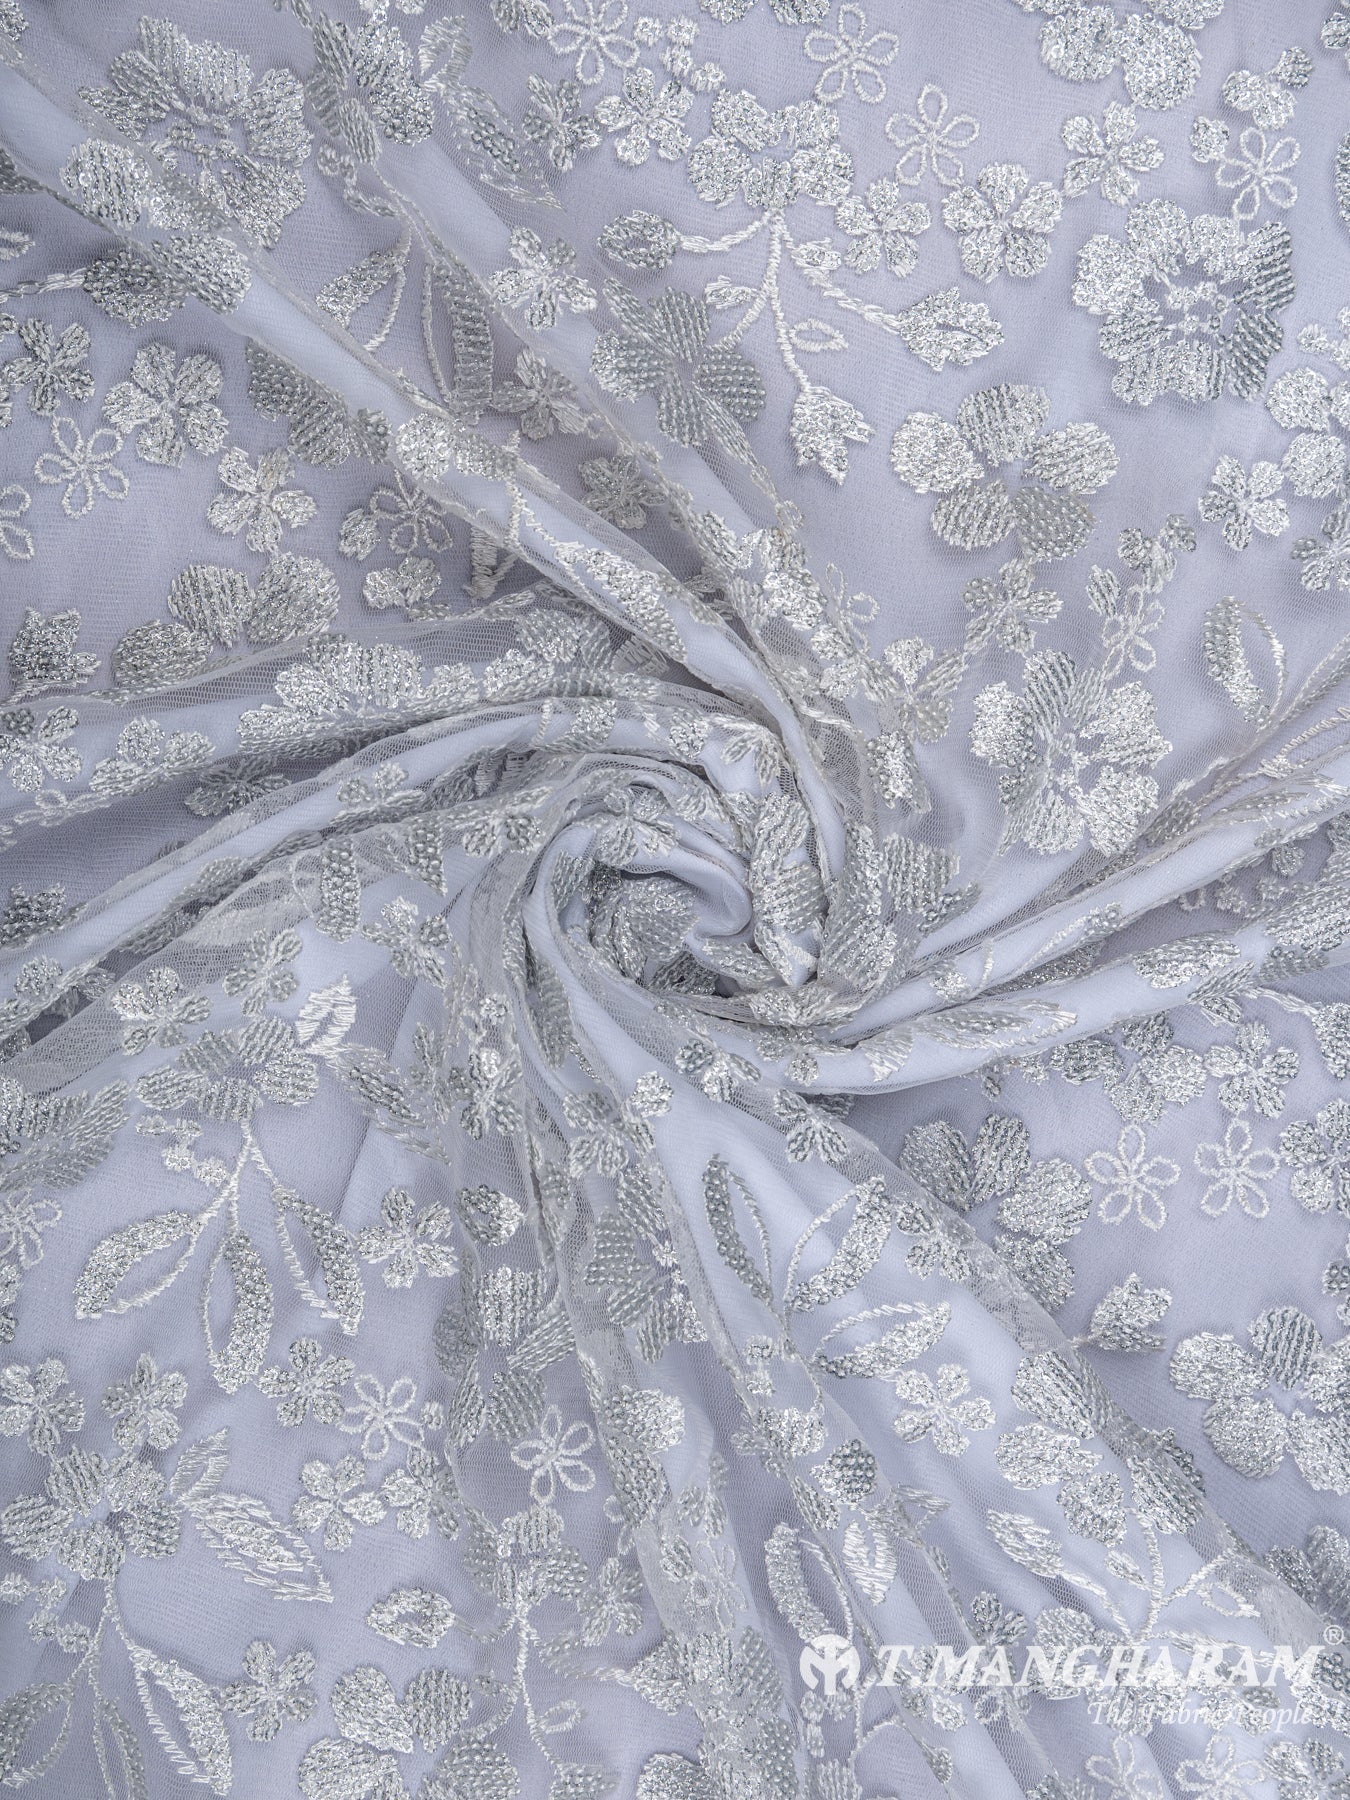 White Net Embroidery Fabric - EC6336 view-1